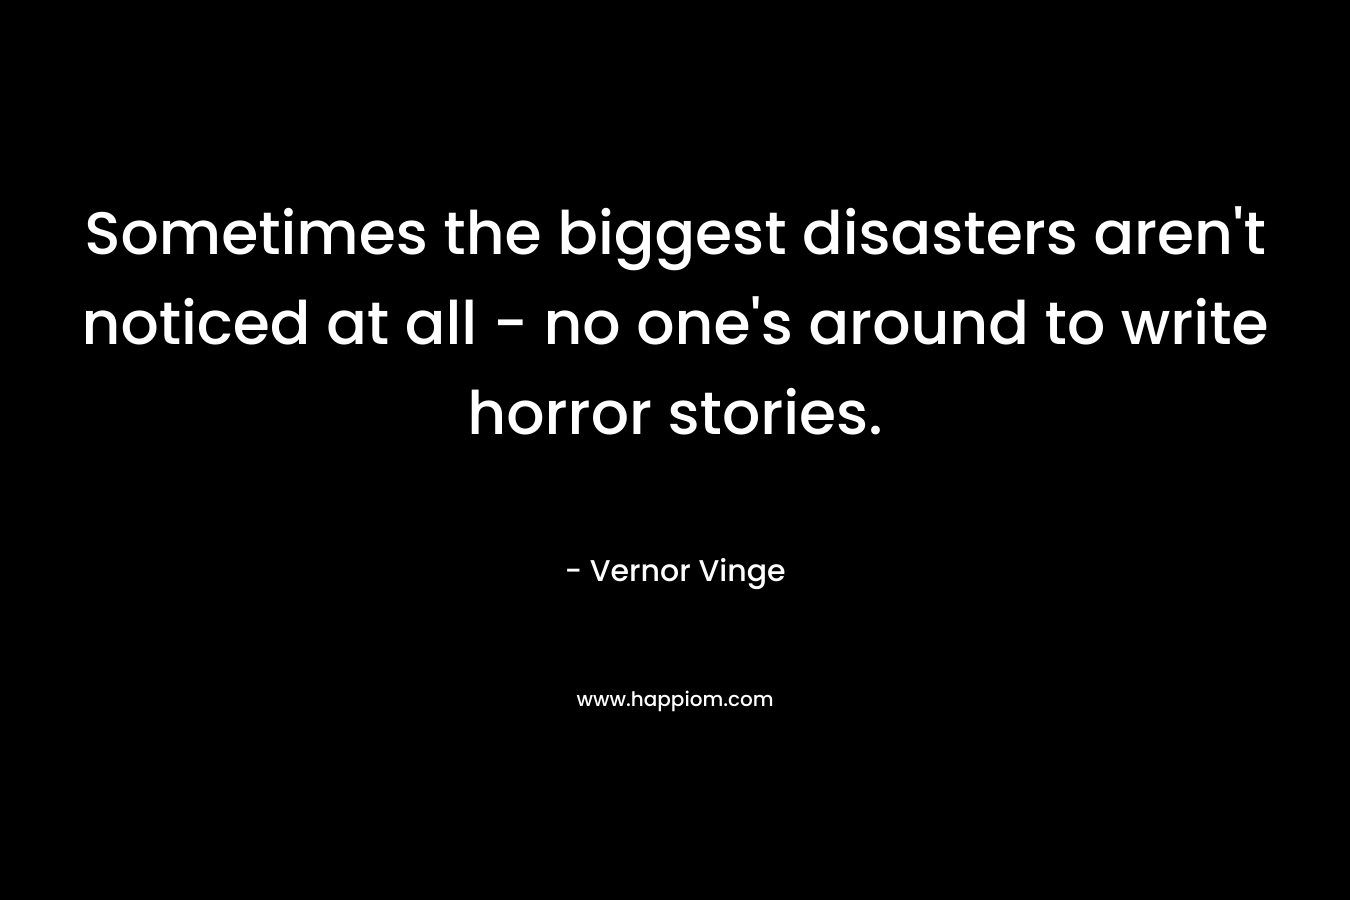 Sometimes the biggest disasters aren't noticed at all - no one's around to write horror stories.